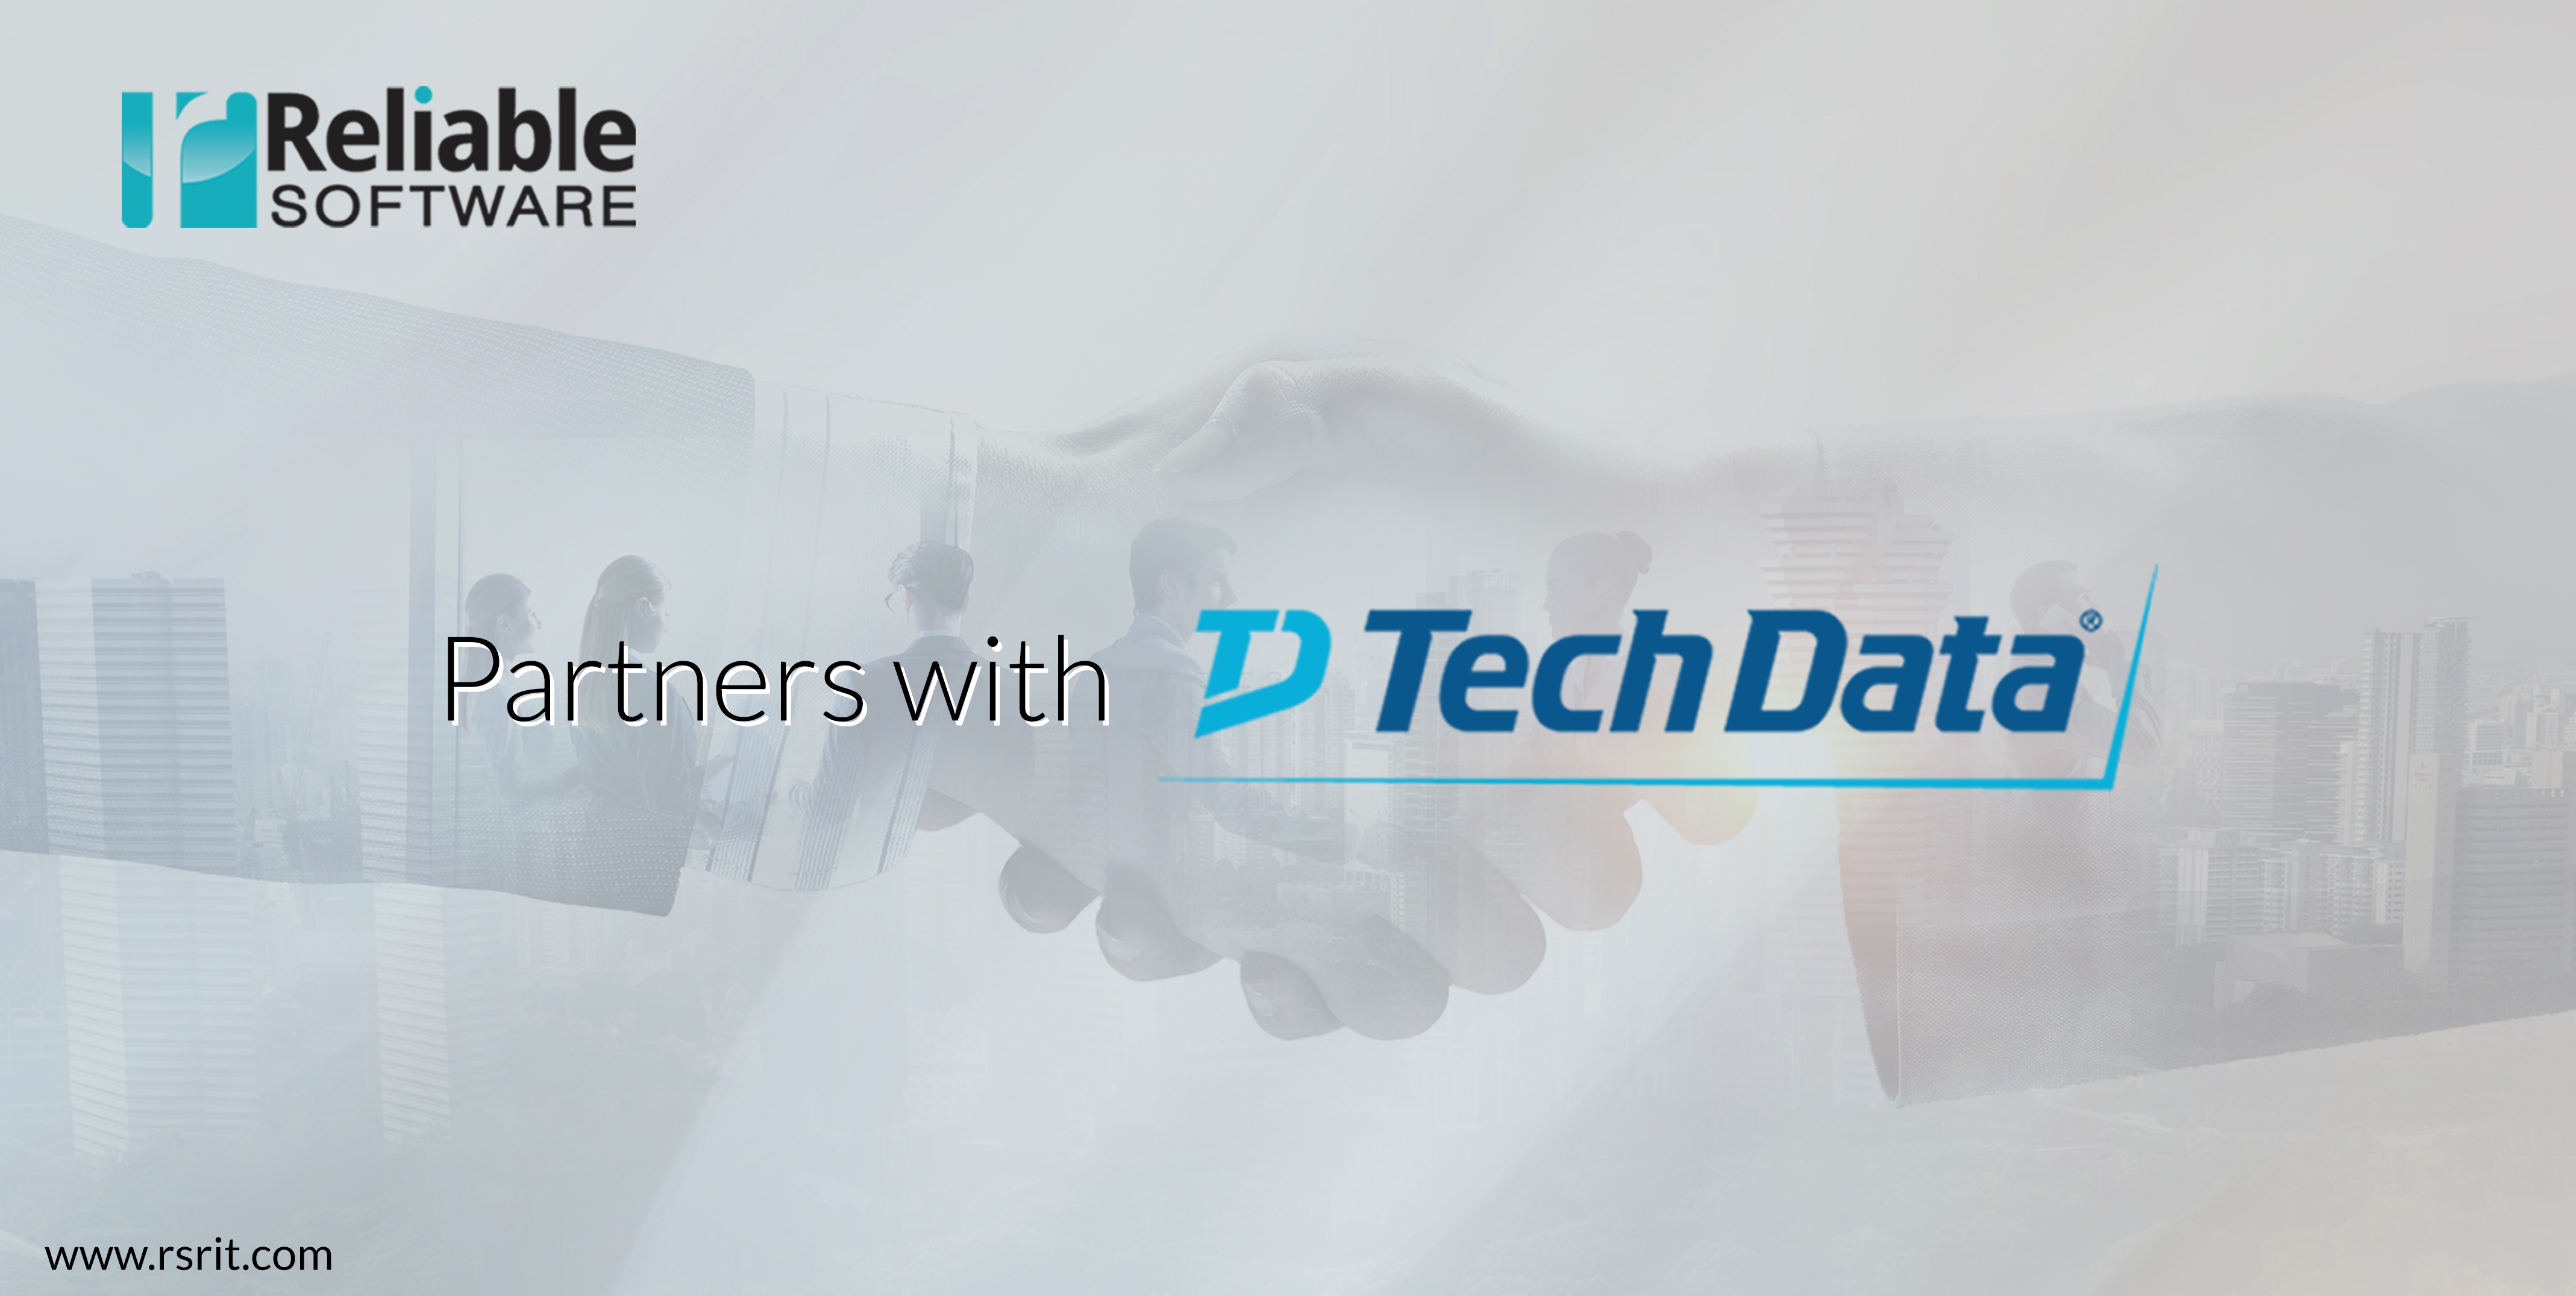 Reliable Software Partners with Tech Data to Extend Service Offerings